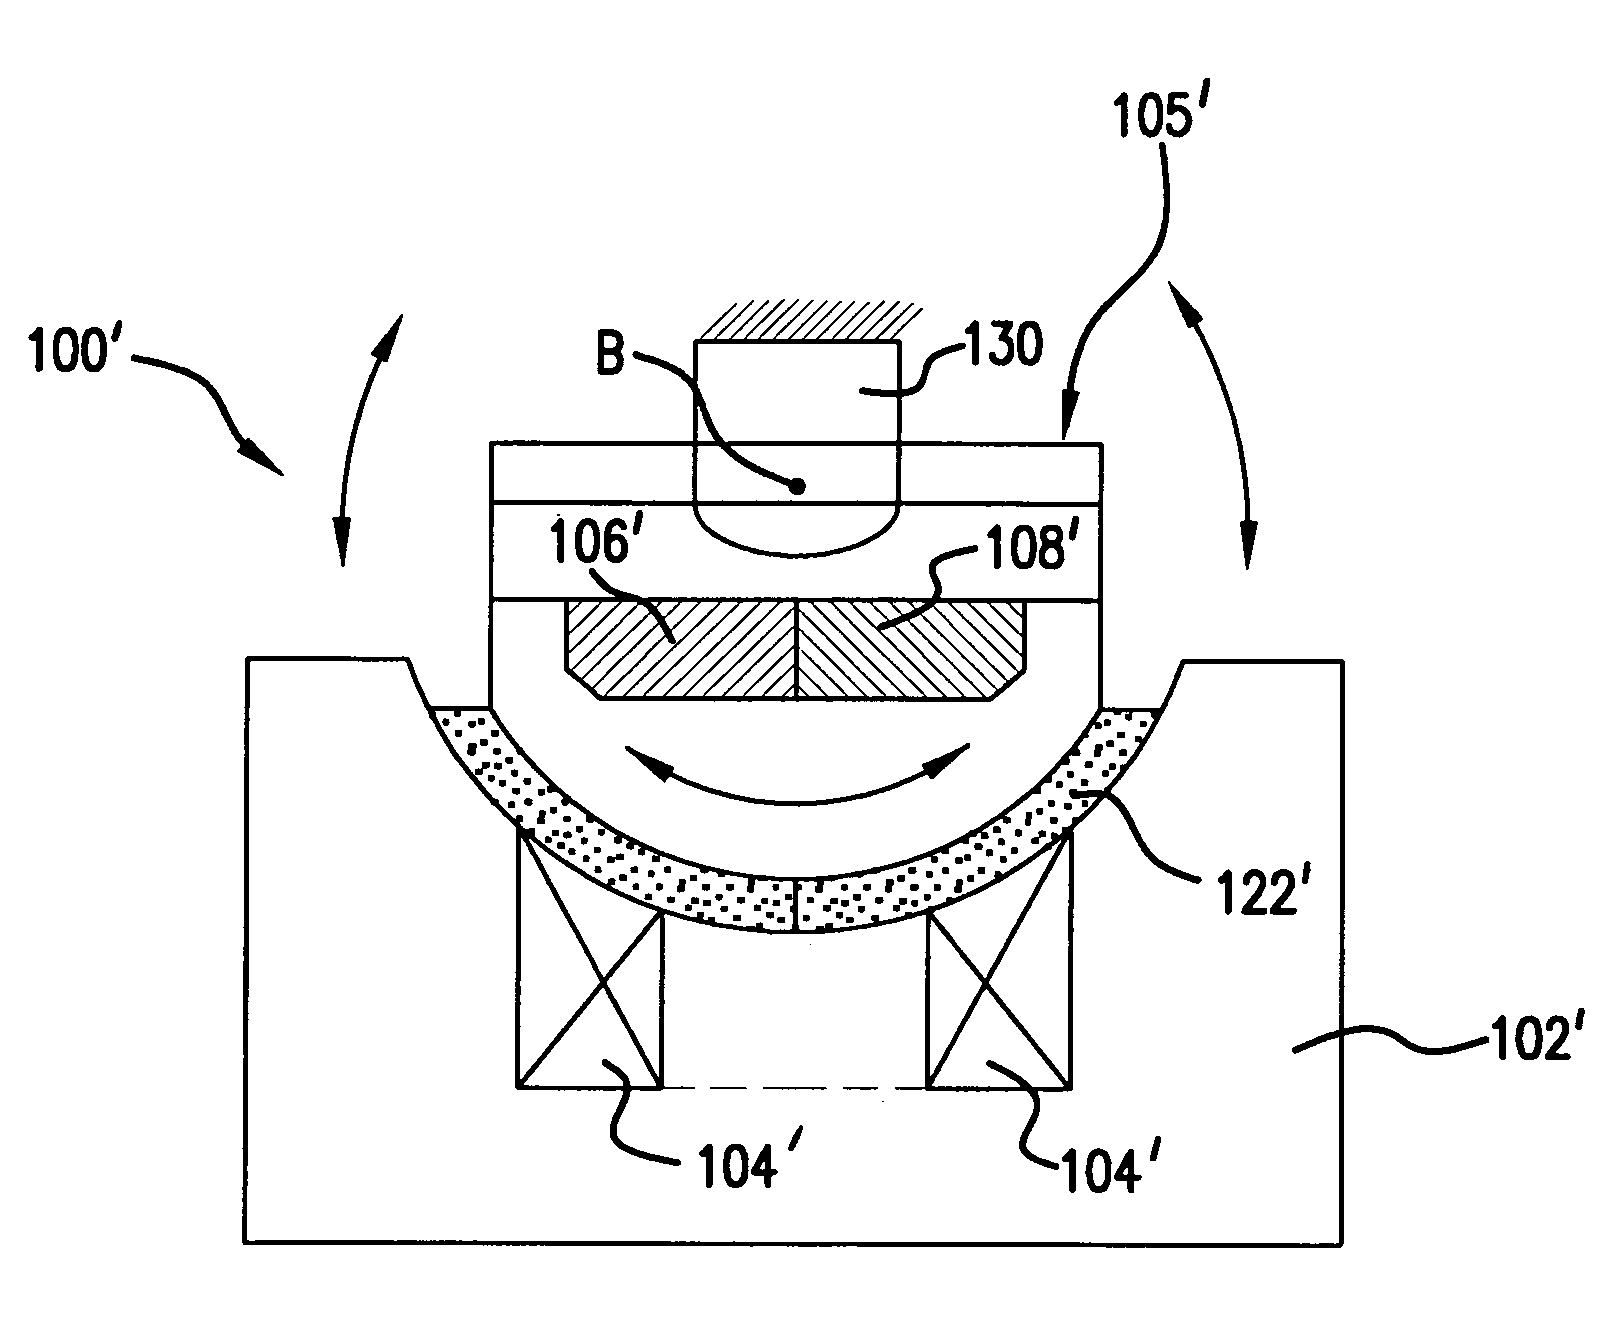 Moving magnet actuator for providing haptic feedback